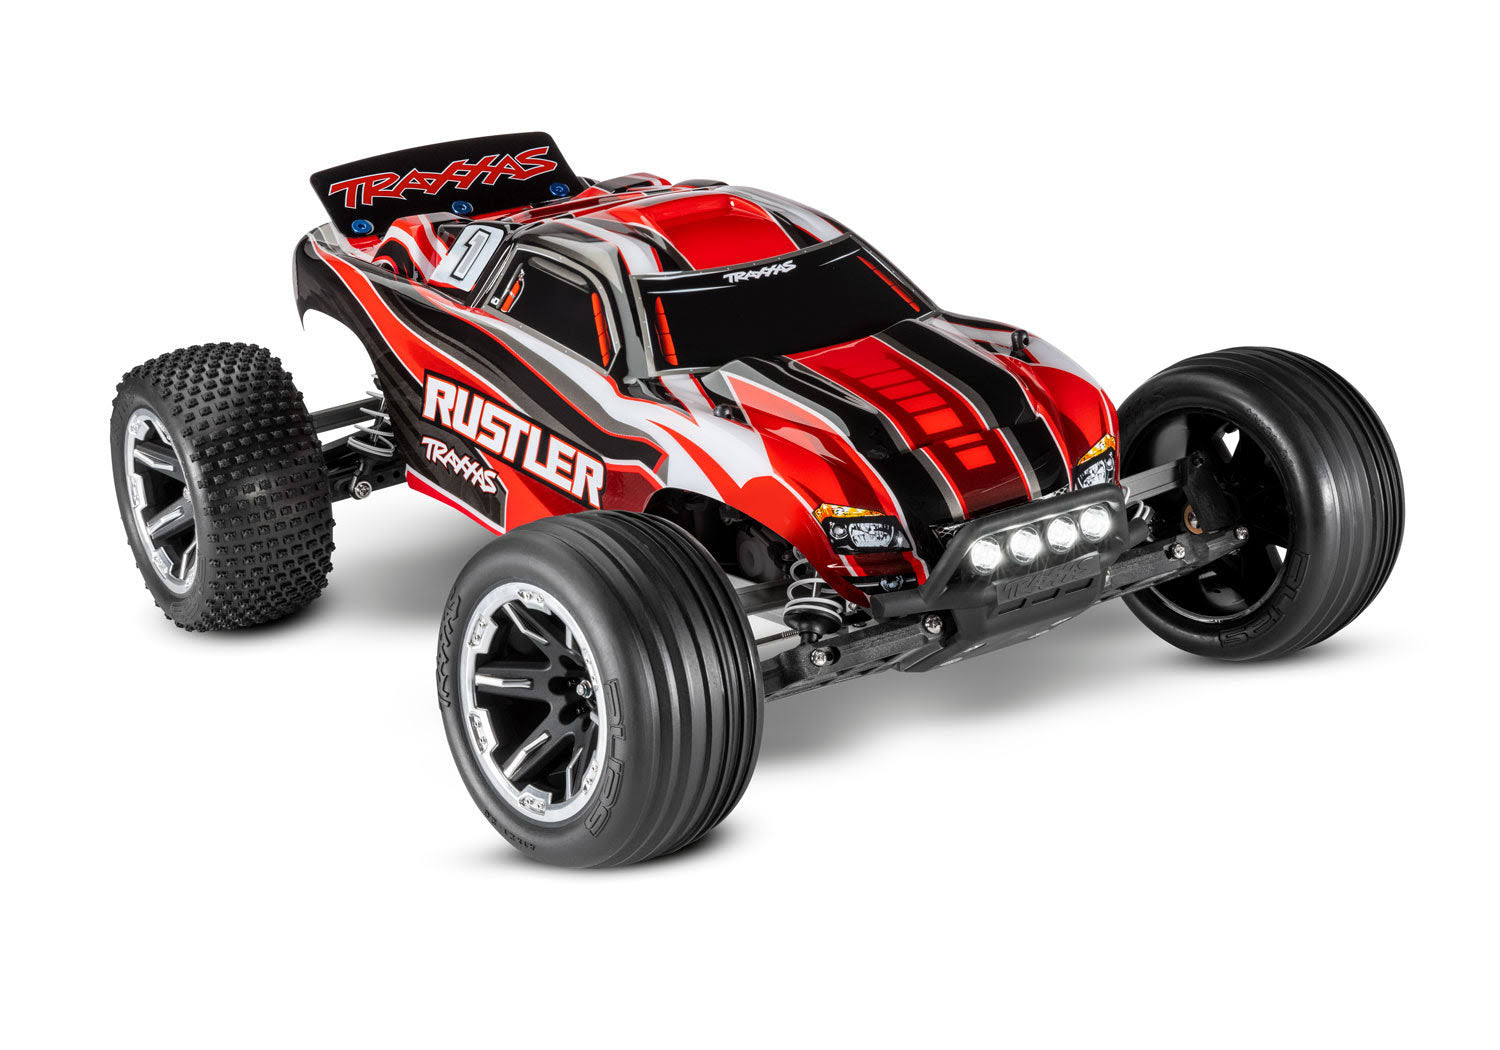 Traxxas Rustler 1/10 RTR with LED Lights, Battery and charger. Black